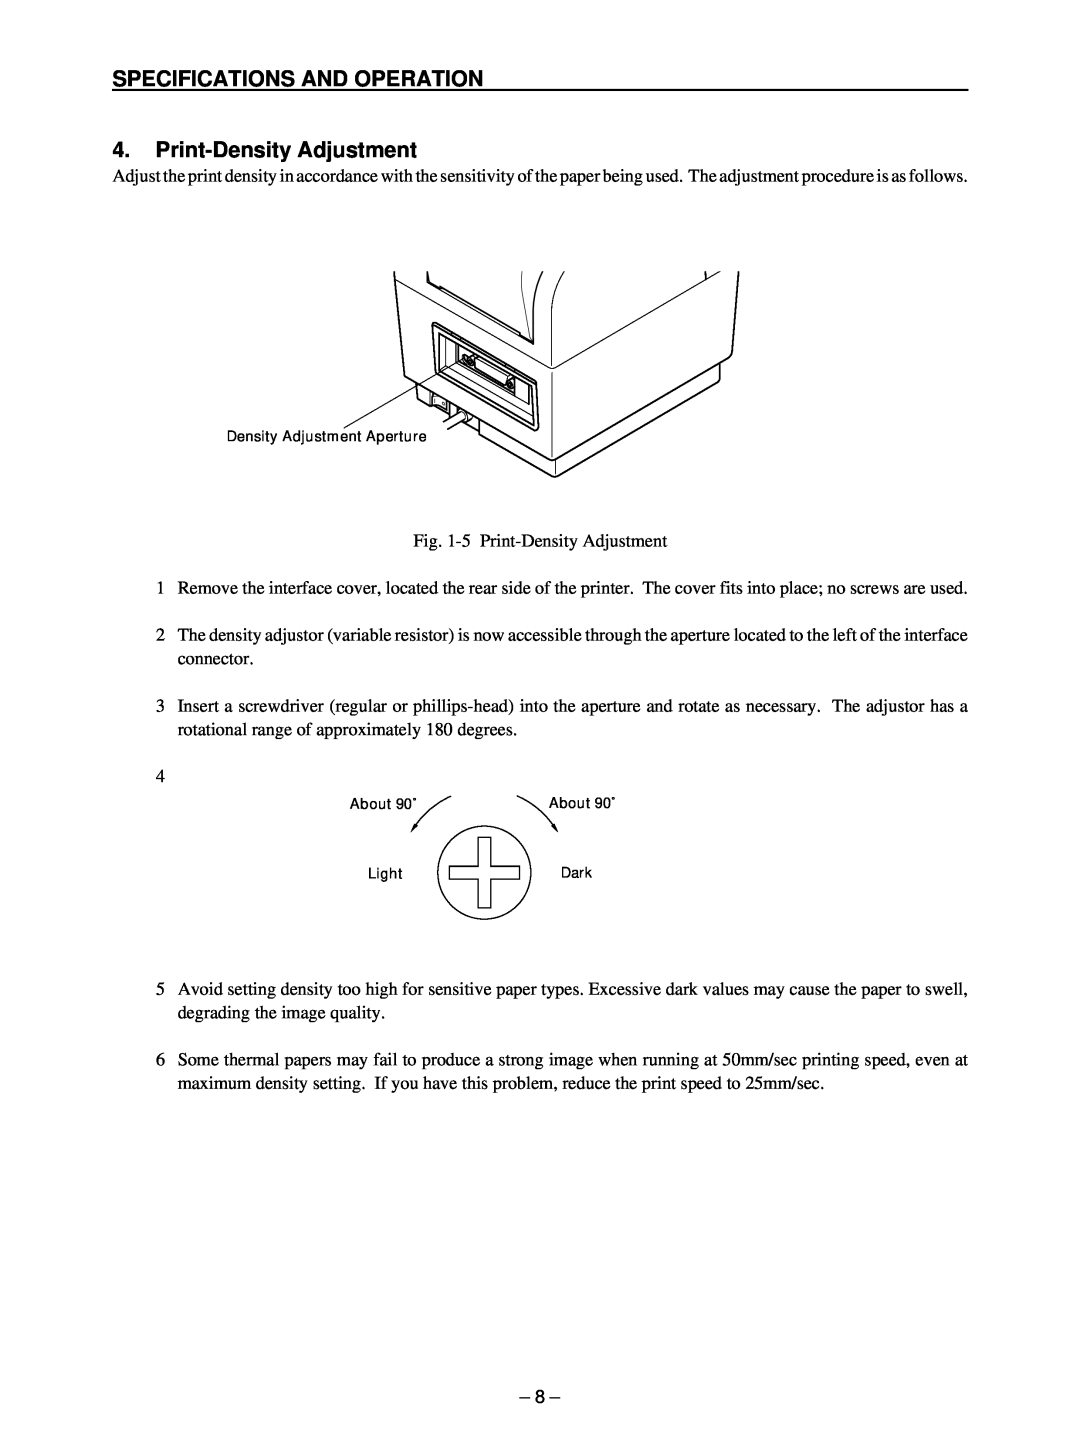 Star Micronics TSP400 technical manual SPECIFICATIONS AND OPERATION 4. Print-Density Adjustment 